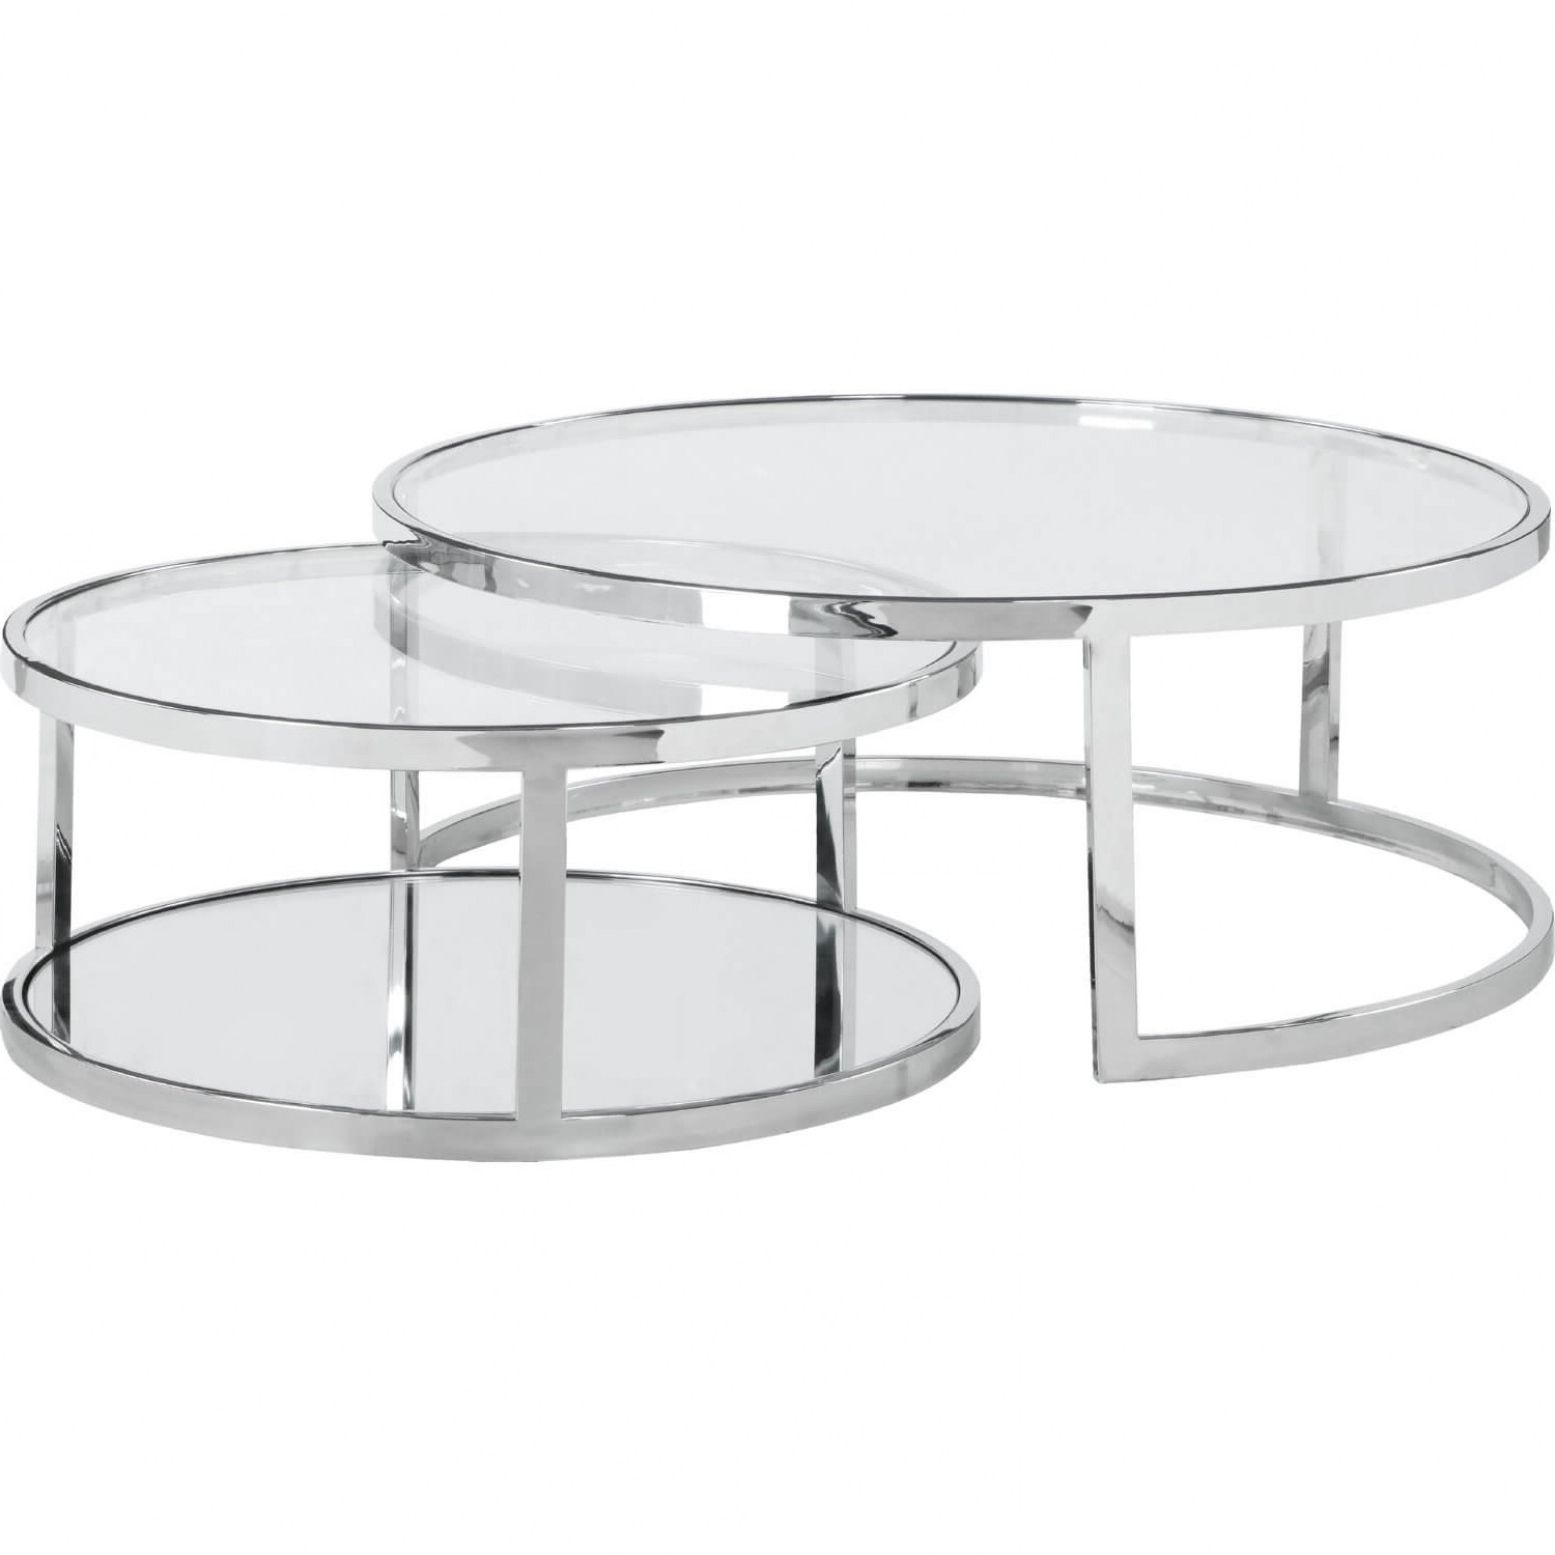 5509 35 Round Nesting Cocktail Table, Clear/polished With Famous Polished Chrome Round Cocktail Tables (Gallery 9 of 20)